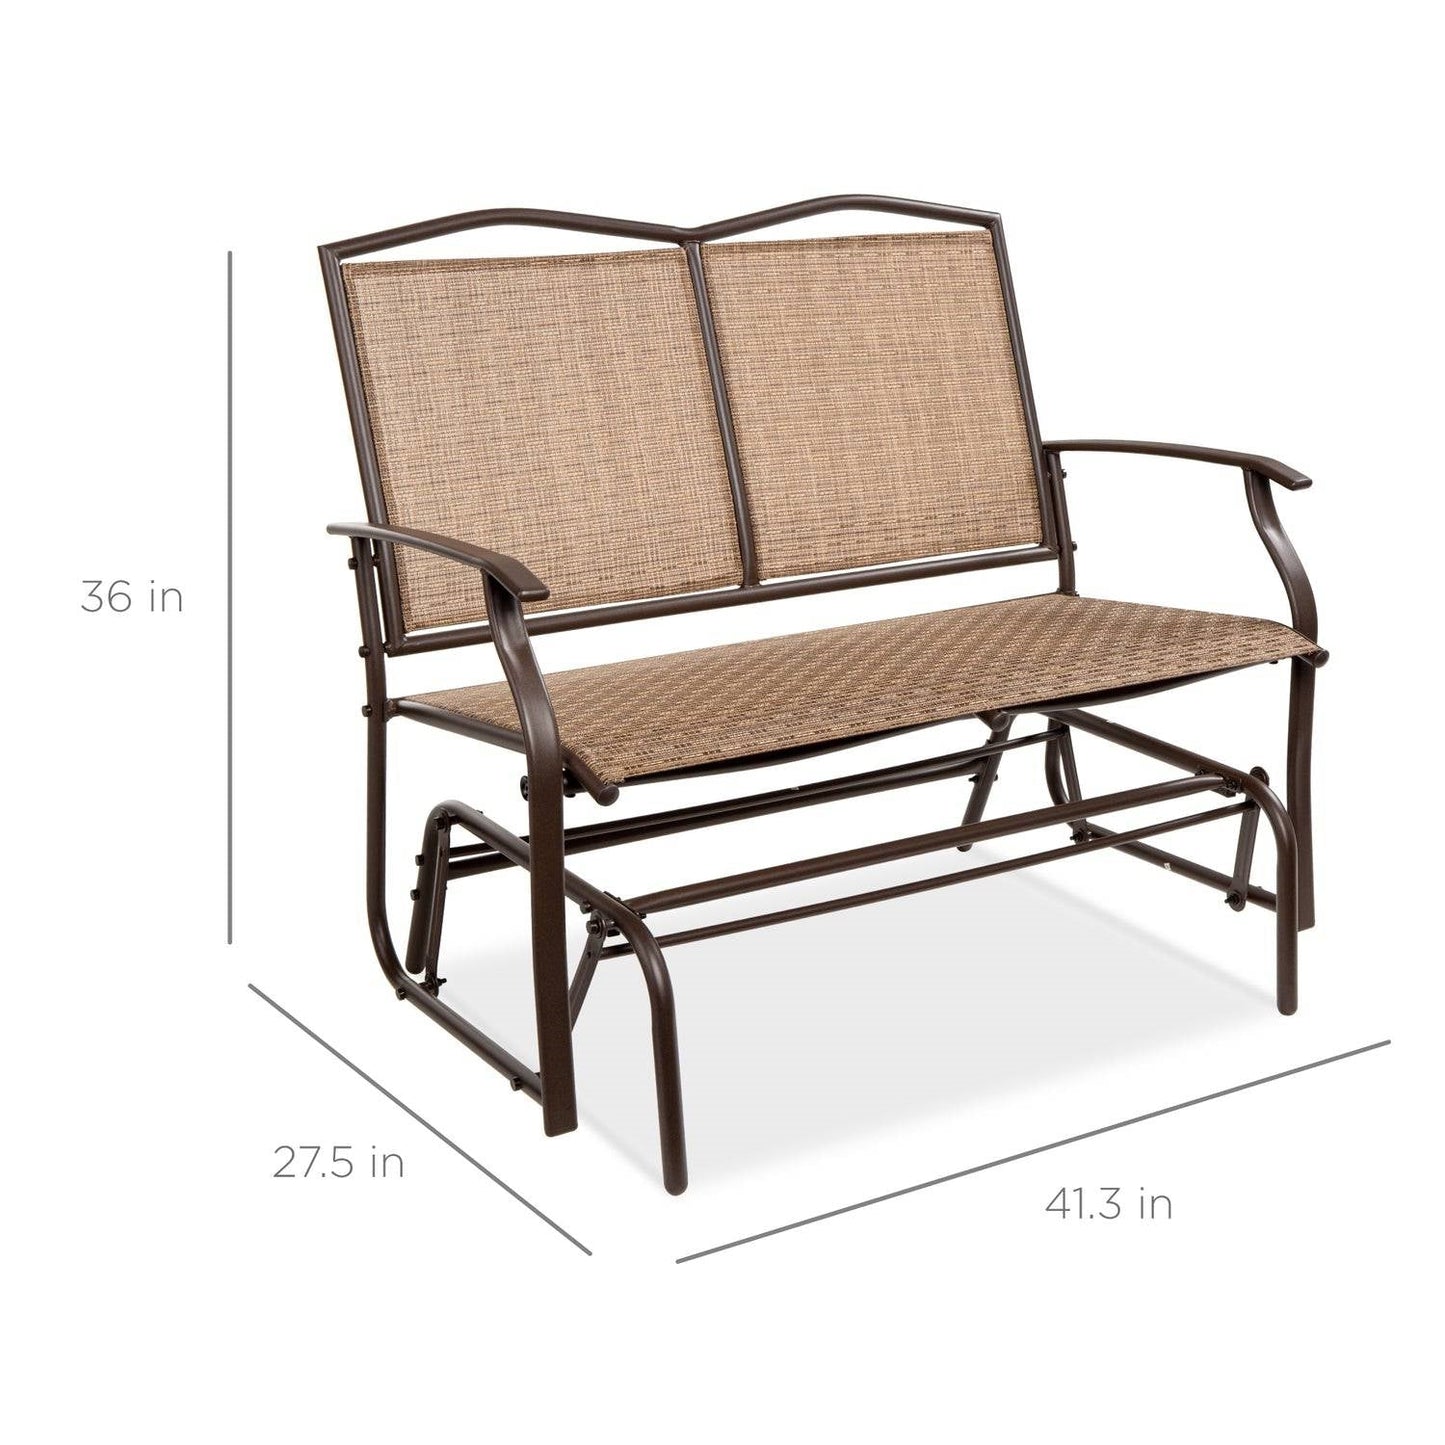 2 Seater Mesh Patio Loveseat Swing Glider Rocker with Armrests in Brown-Novel Home